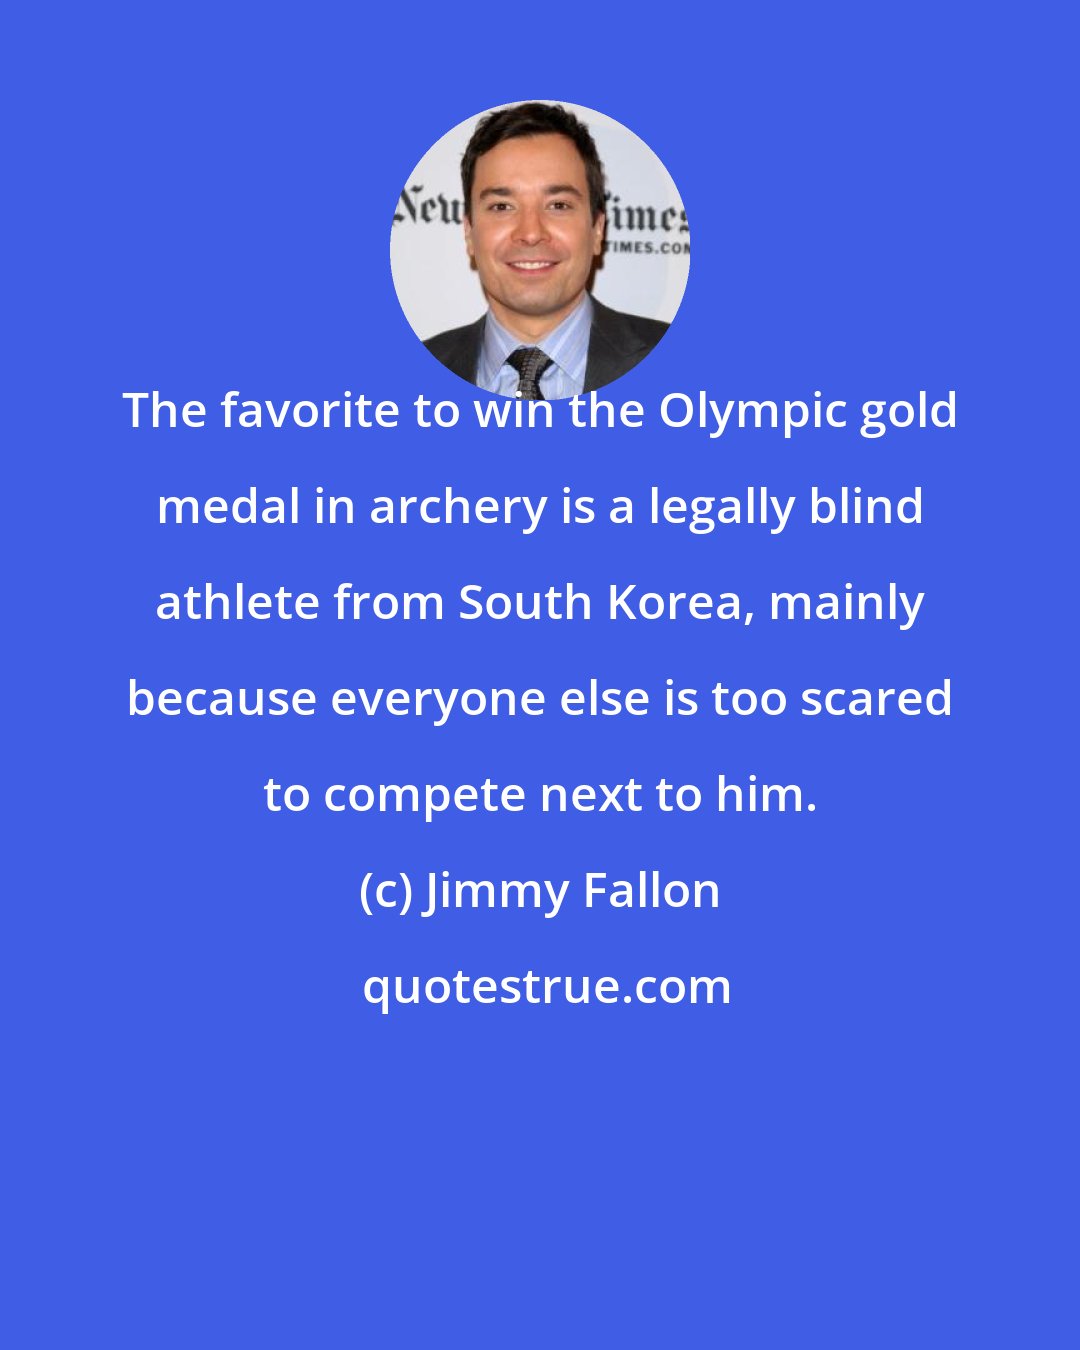 Jimmy Fallon: The favorite to win the Olympic gold medal in archery is a legally blind athlete from South Korea, mainly because everyone else is too scared to compete next to him.